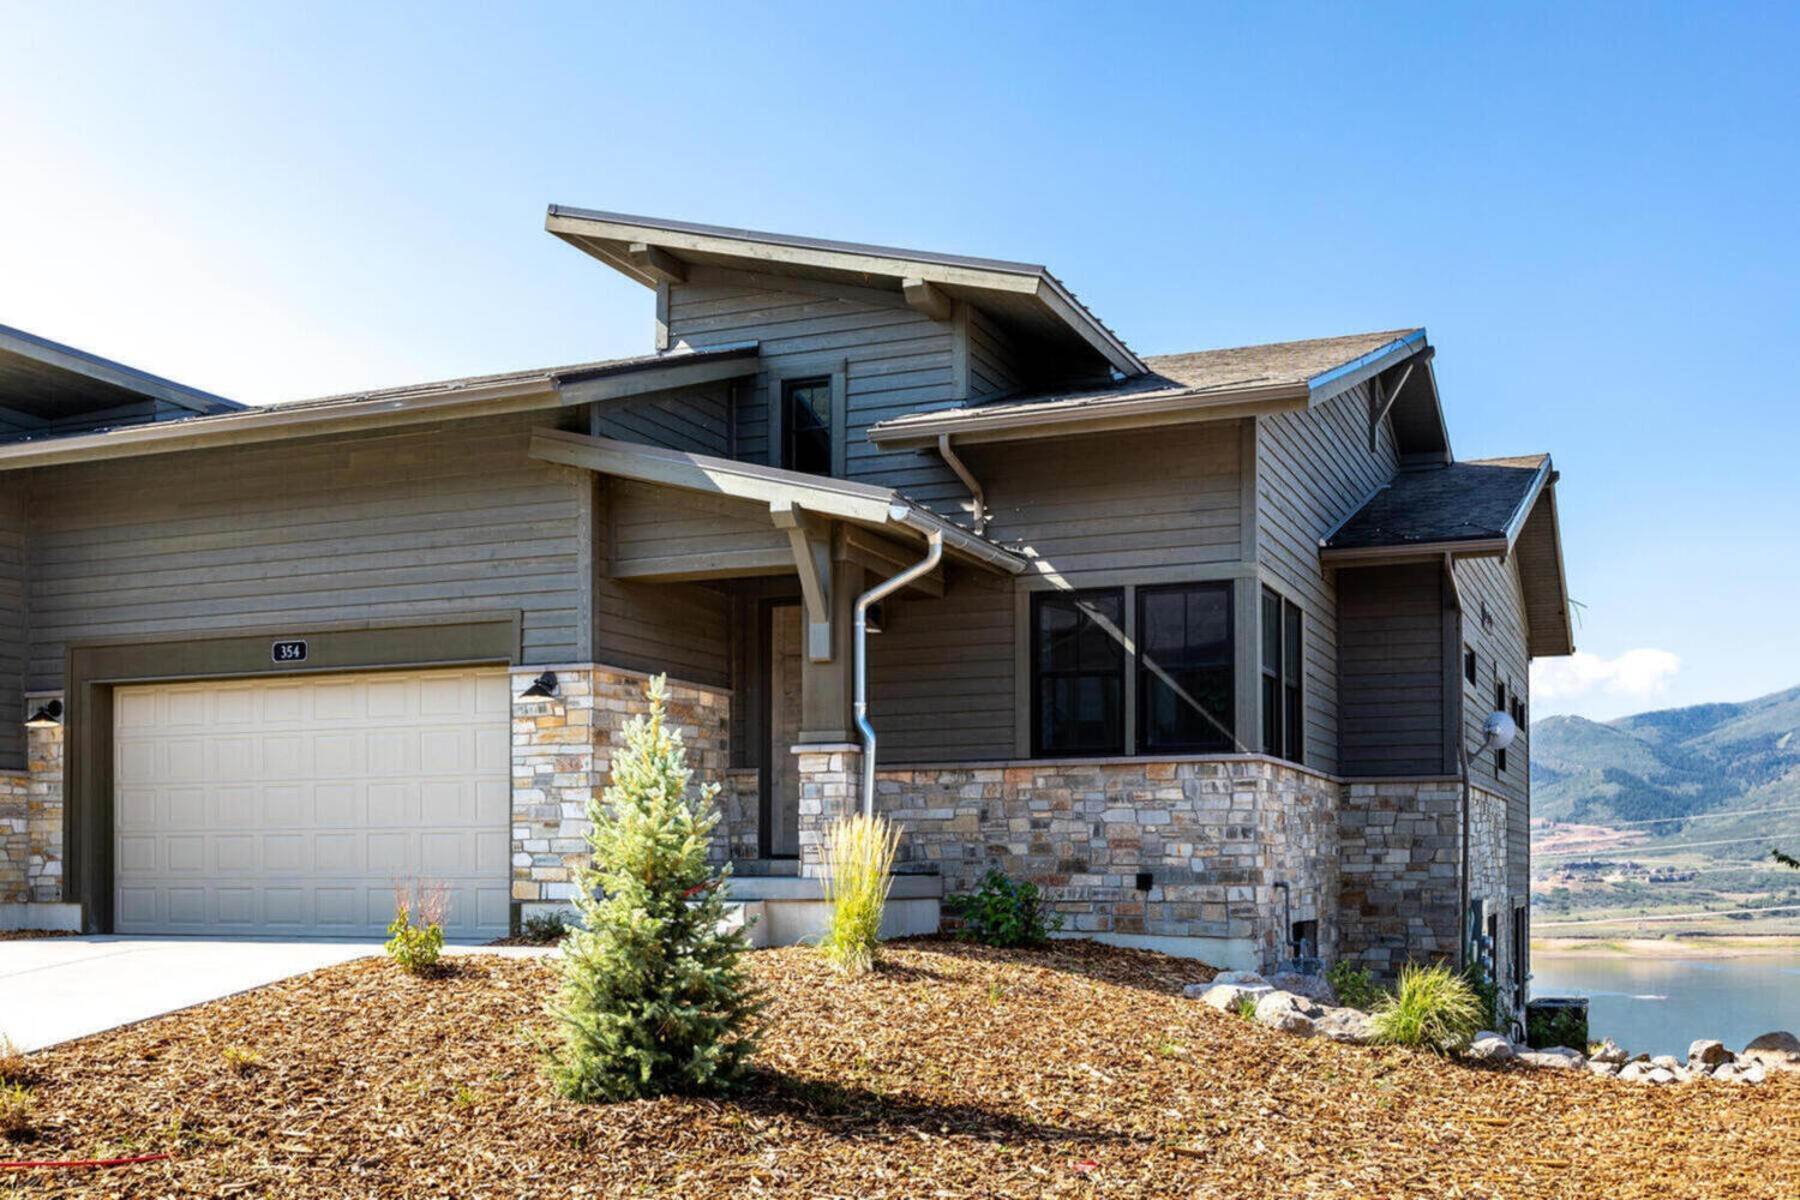 Townhouse for Sale at Lakefront Community With Views Of Deer Valley Resort And Jordanelle Reservoir 598 E Silver Hill Loop, Lot 103 Hideout Canyon, Utah 84036 United States